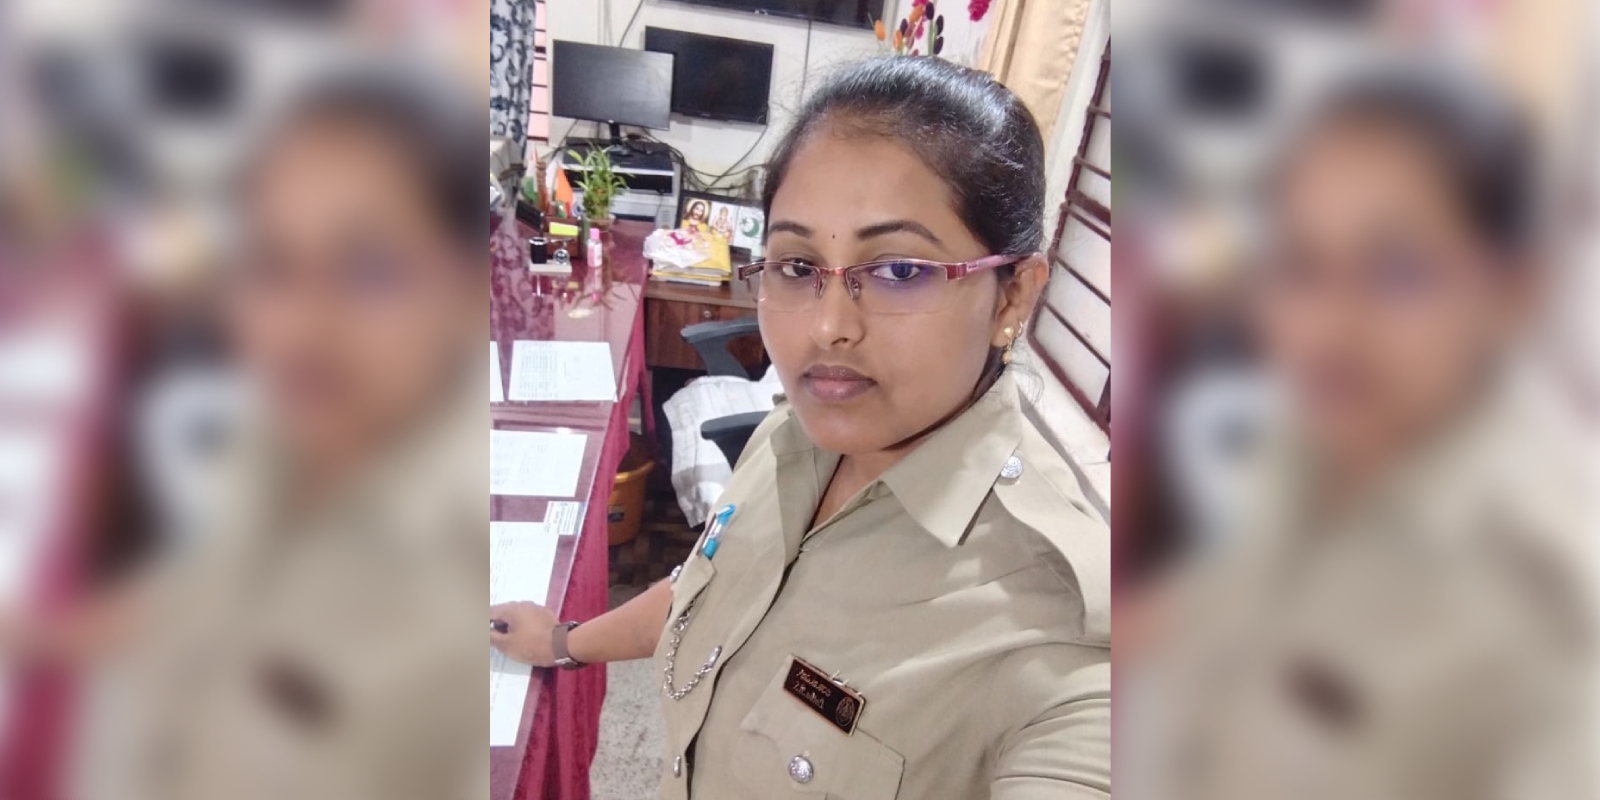 Tarikere Woman Constable BS Latha, who has been suspended over allegations of misbehaviour and posting a WhatsApp status against a Karnataka MLA.